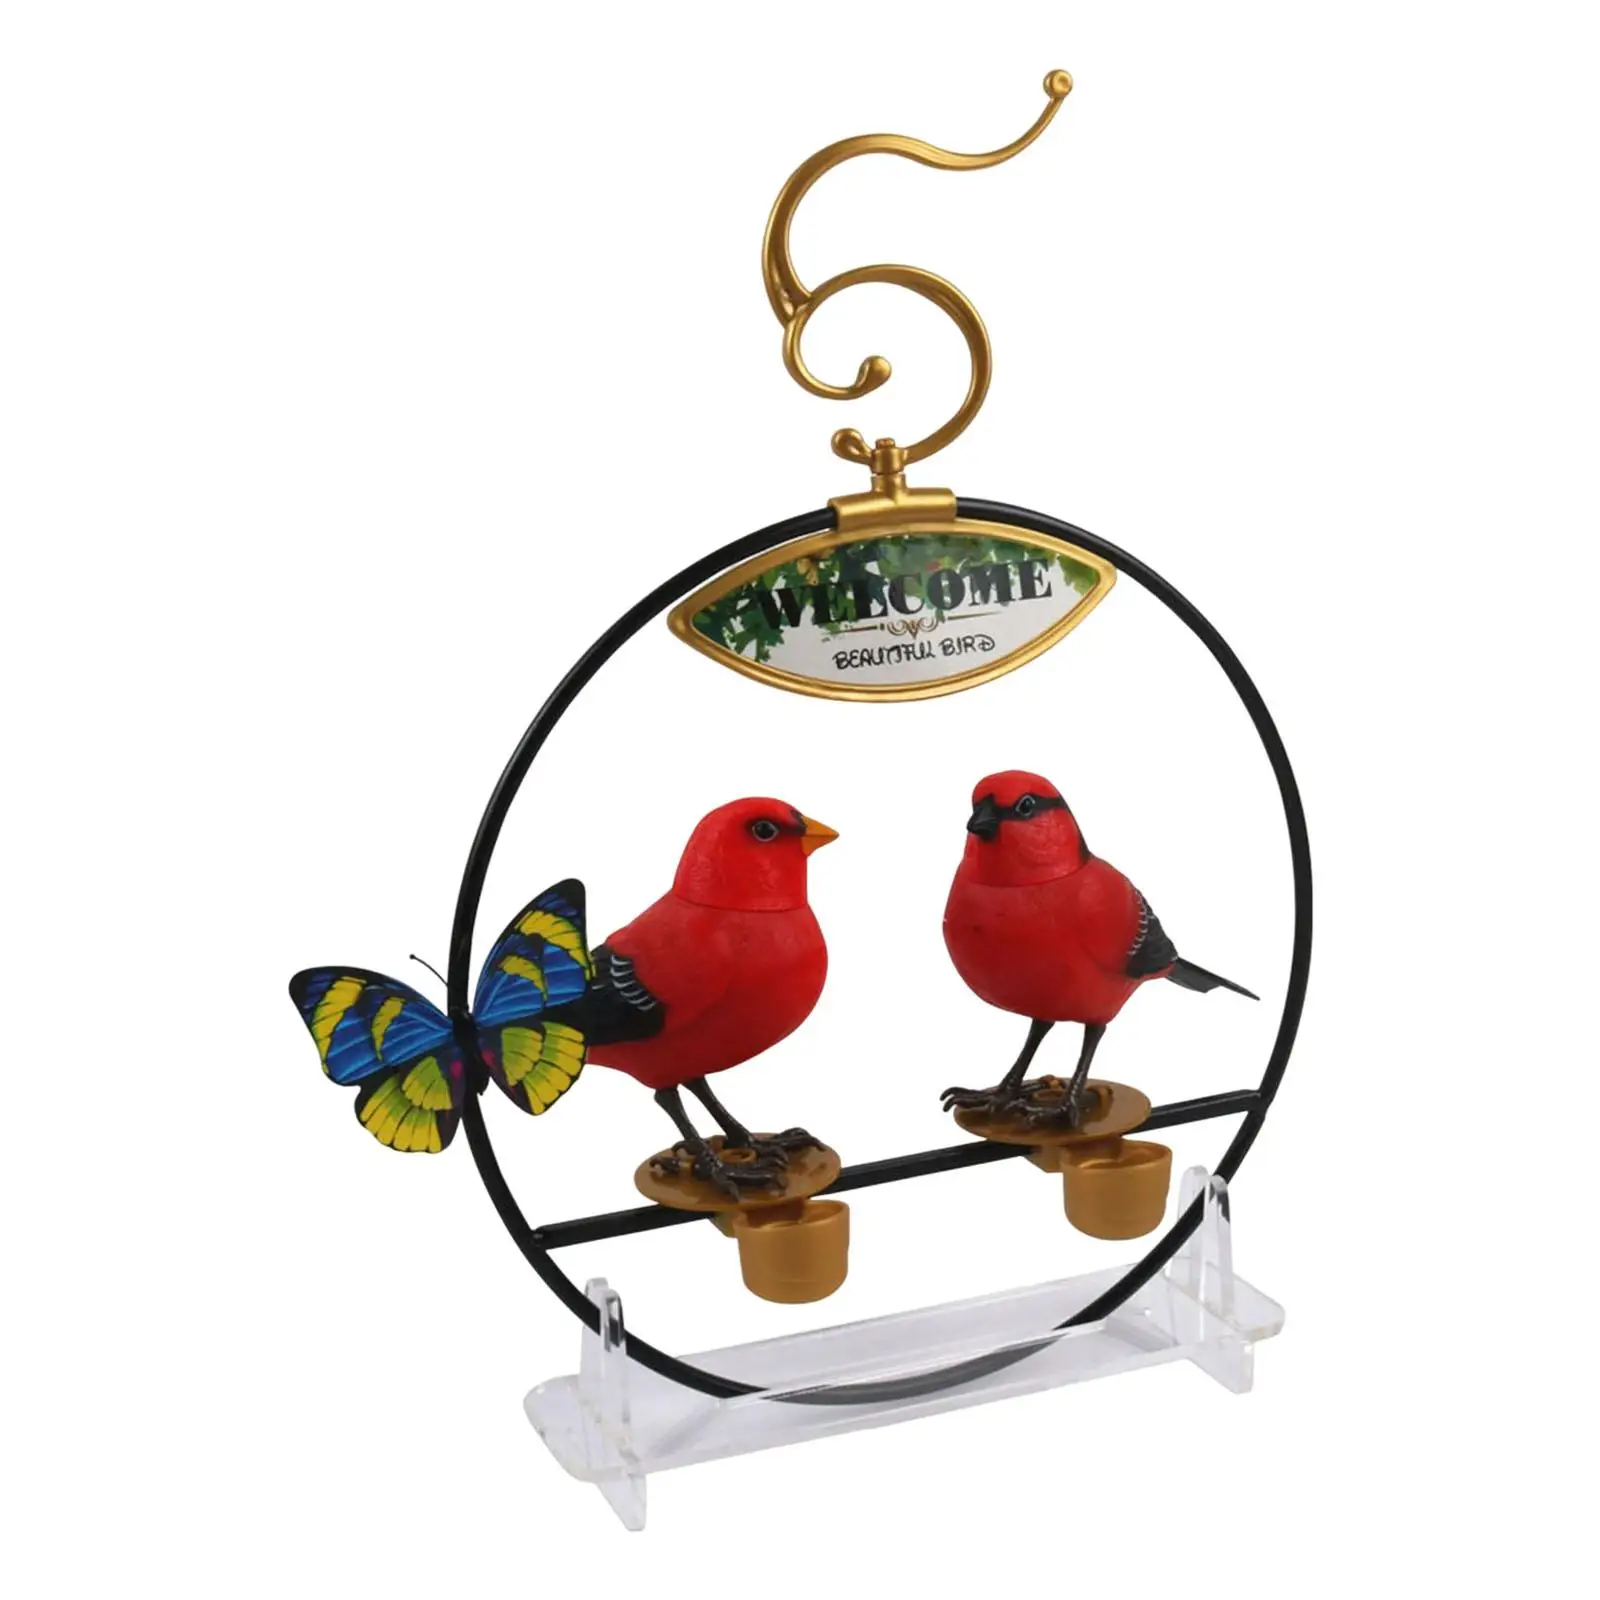 Cute Chirping Dancing Parrots Bird Battery Powered with Voice Sensor Sound Activated Chirping Bird Kids Toy Gift Home Decoration